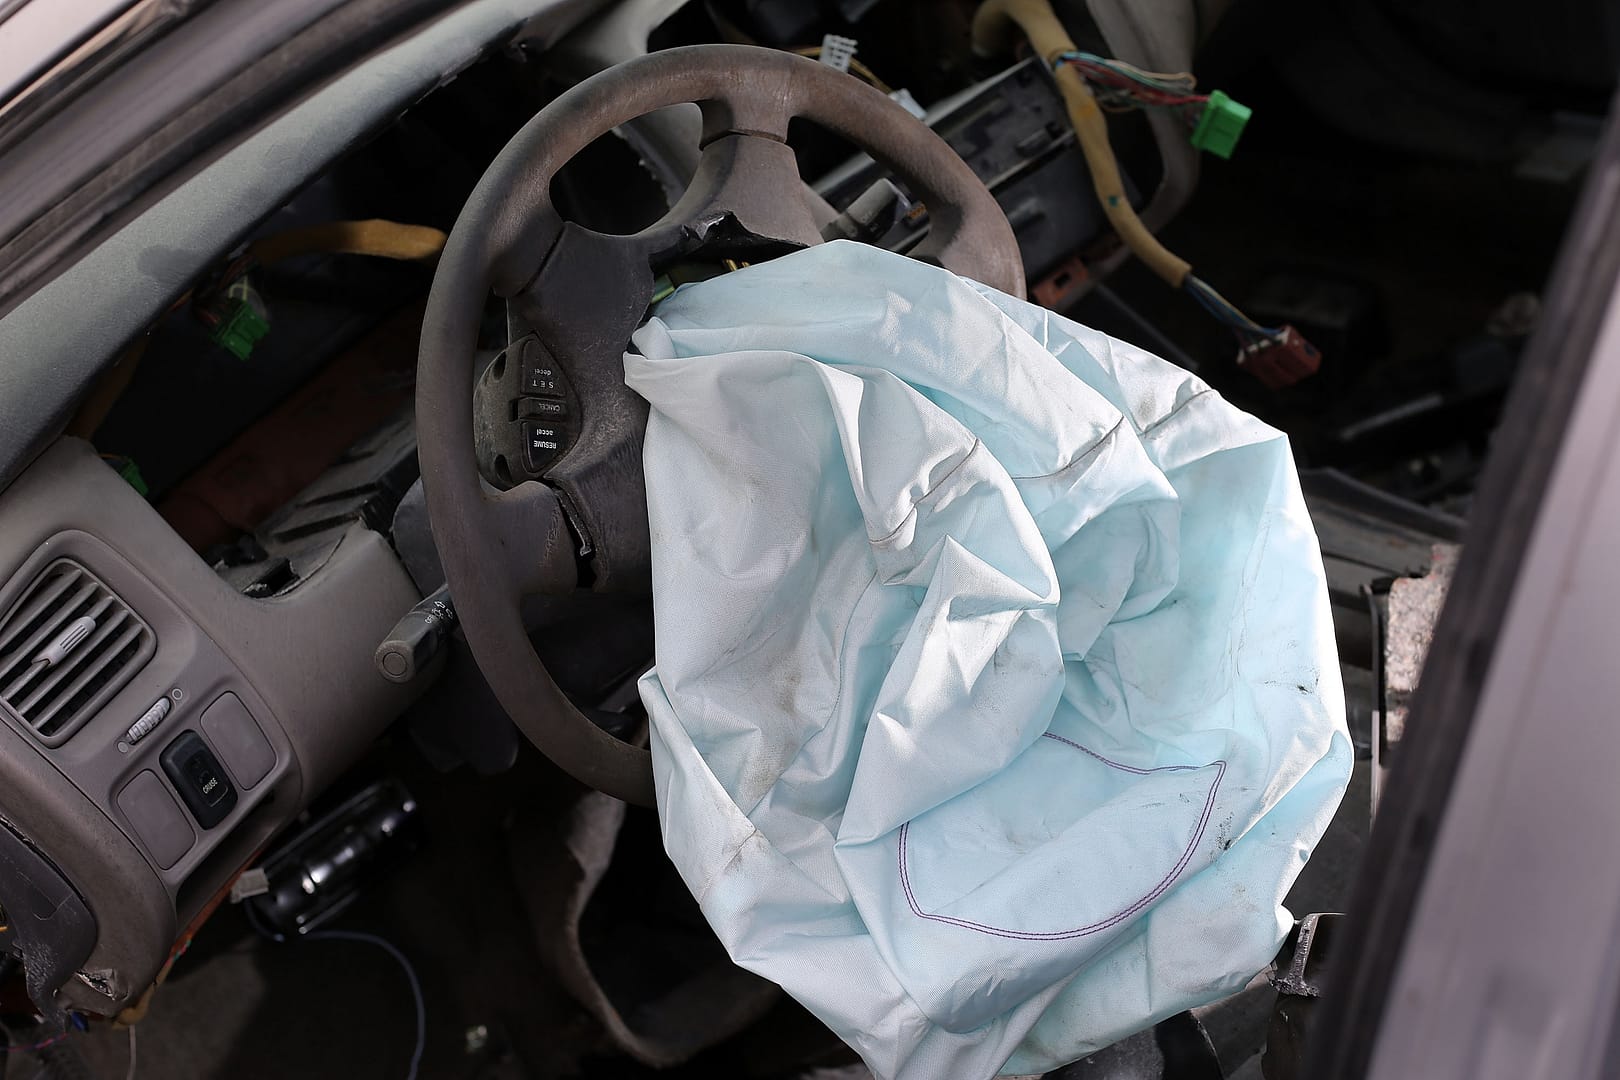 MEDLEY, FL - MAY 22:  A deployed airbag is seen in a 2001 Honda Accord at the LKQ Pick Your Part salvage yard on May 22, 2015 in Medley, Florida. The largest automotive recall in history centers around the defective Takata Corp. air bags that are found in millions of vehicles that are manufactured by BMW, Chrysler, Daimler Trucks, Ford, General Motors, Honda, Mazda, Mitsubishi, Nissan, Subaru and Toyota.  (Photo by Joe Raedle/Getty Images)